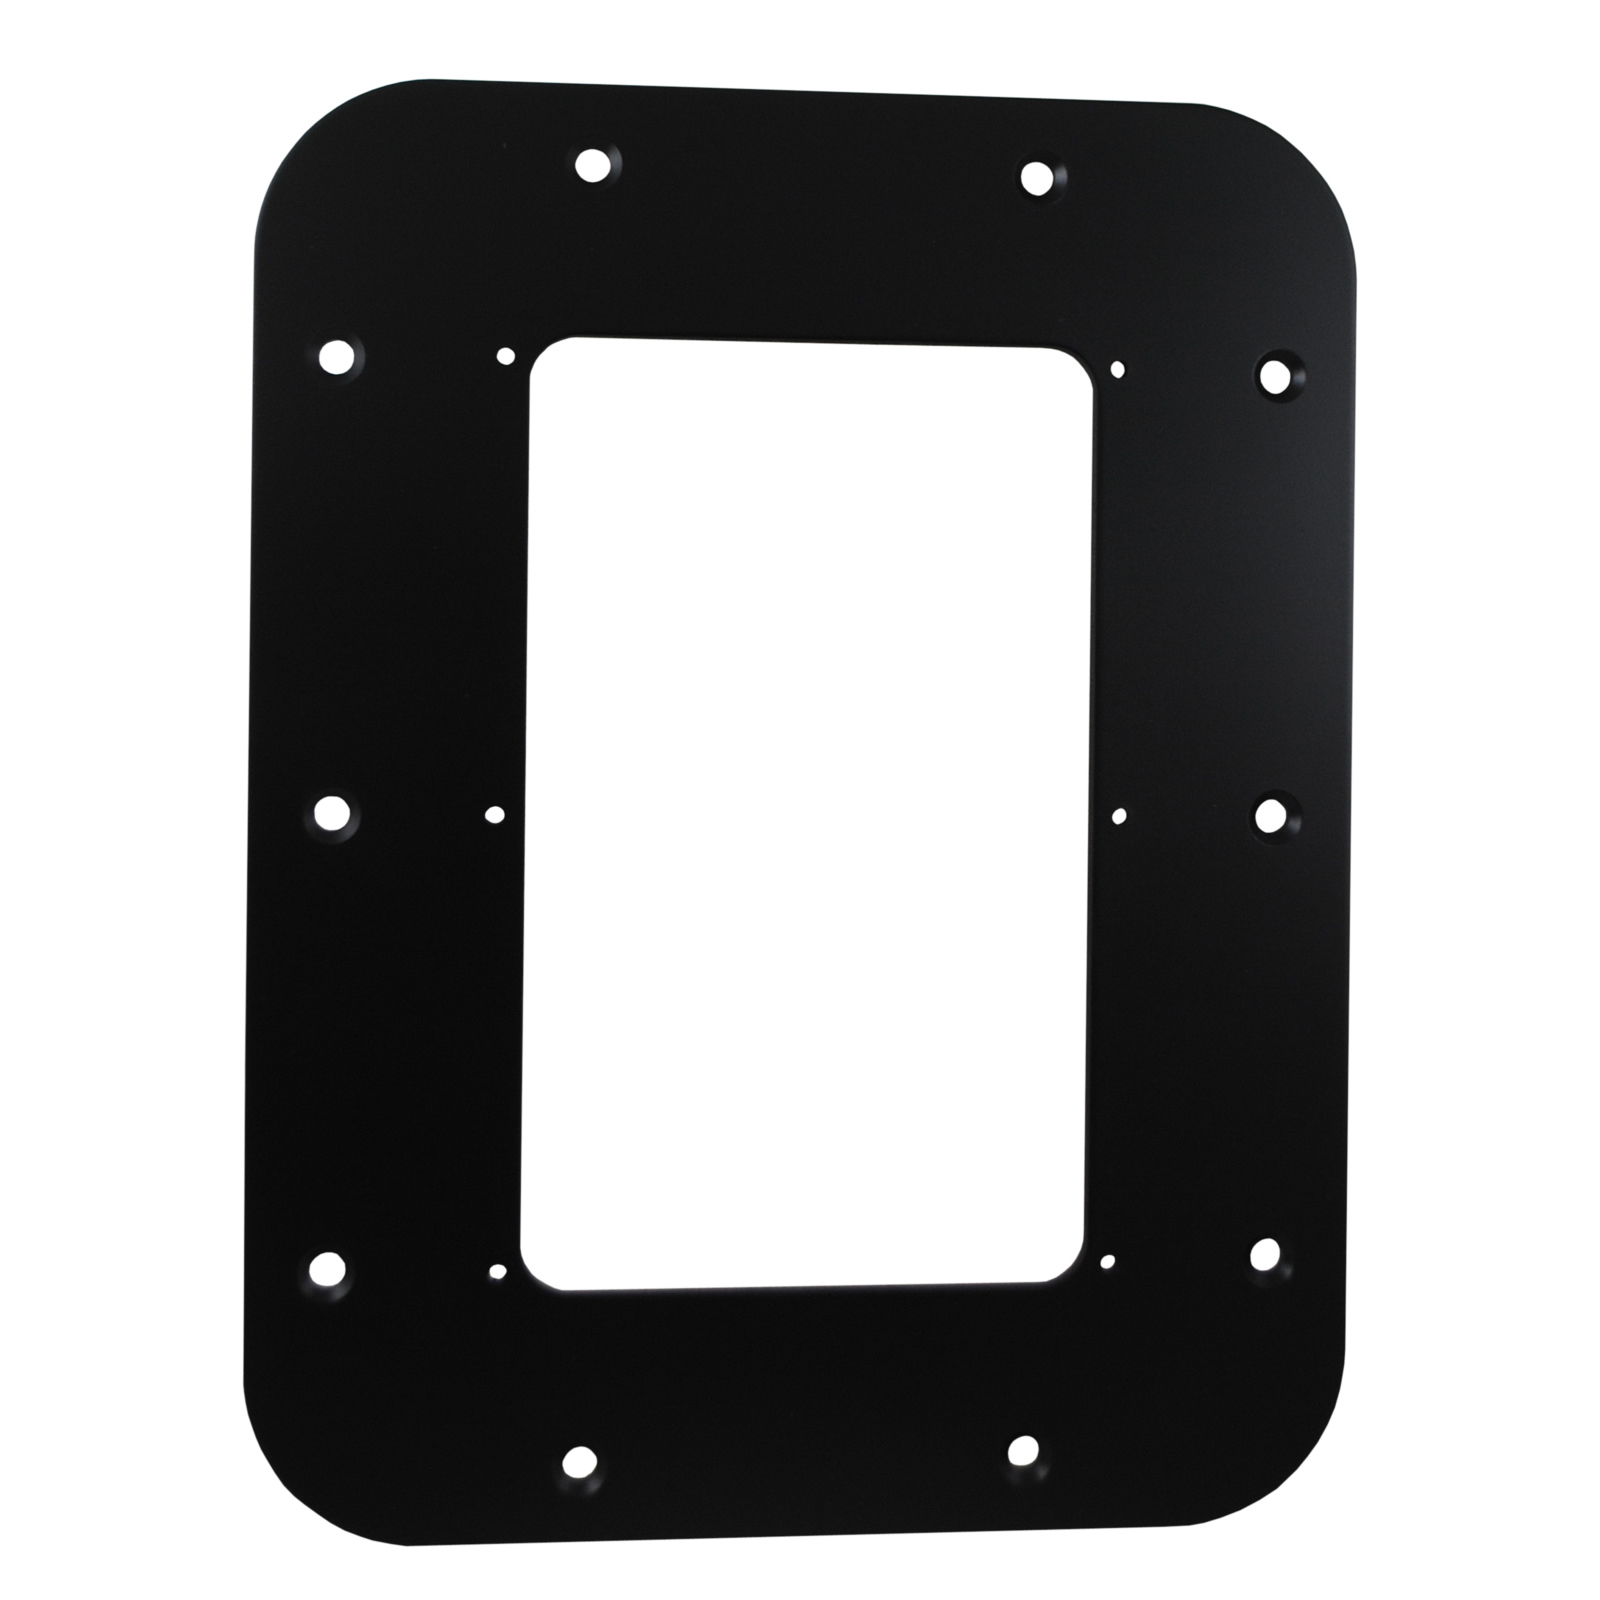 Aquatic AV AQ-DMP-1 Mounting Plate For Upgrading From DM-2 Series to DM-4 Series Stereos